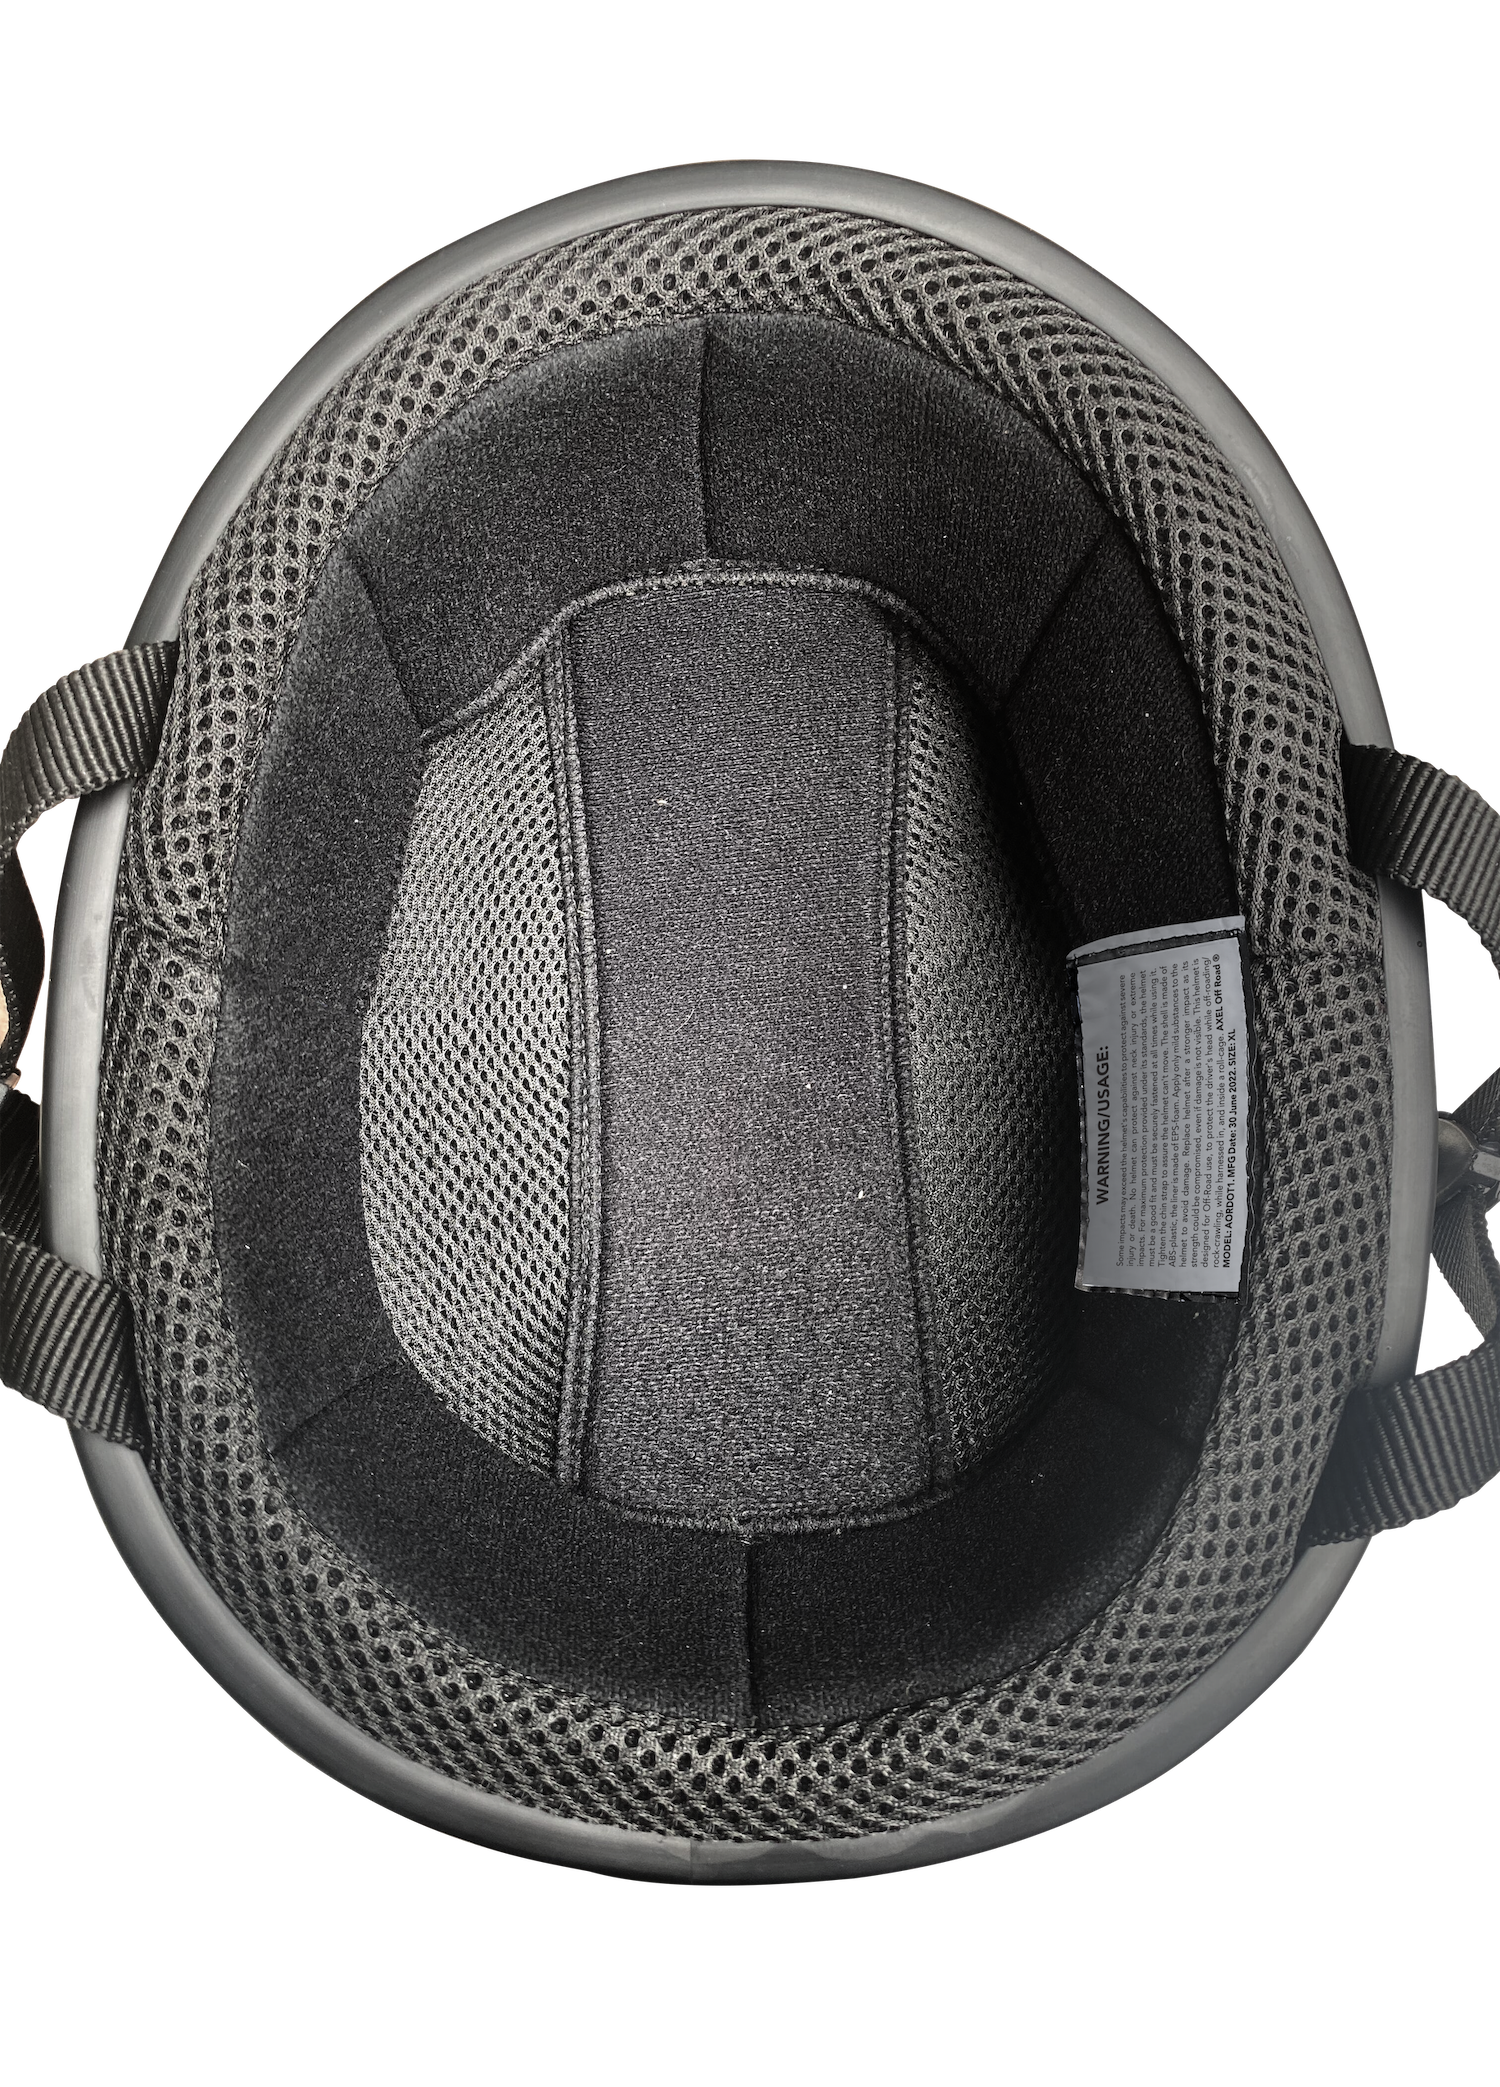 Inside view of low profile DOT approved off roading helmet in grey